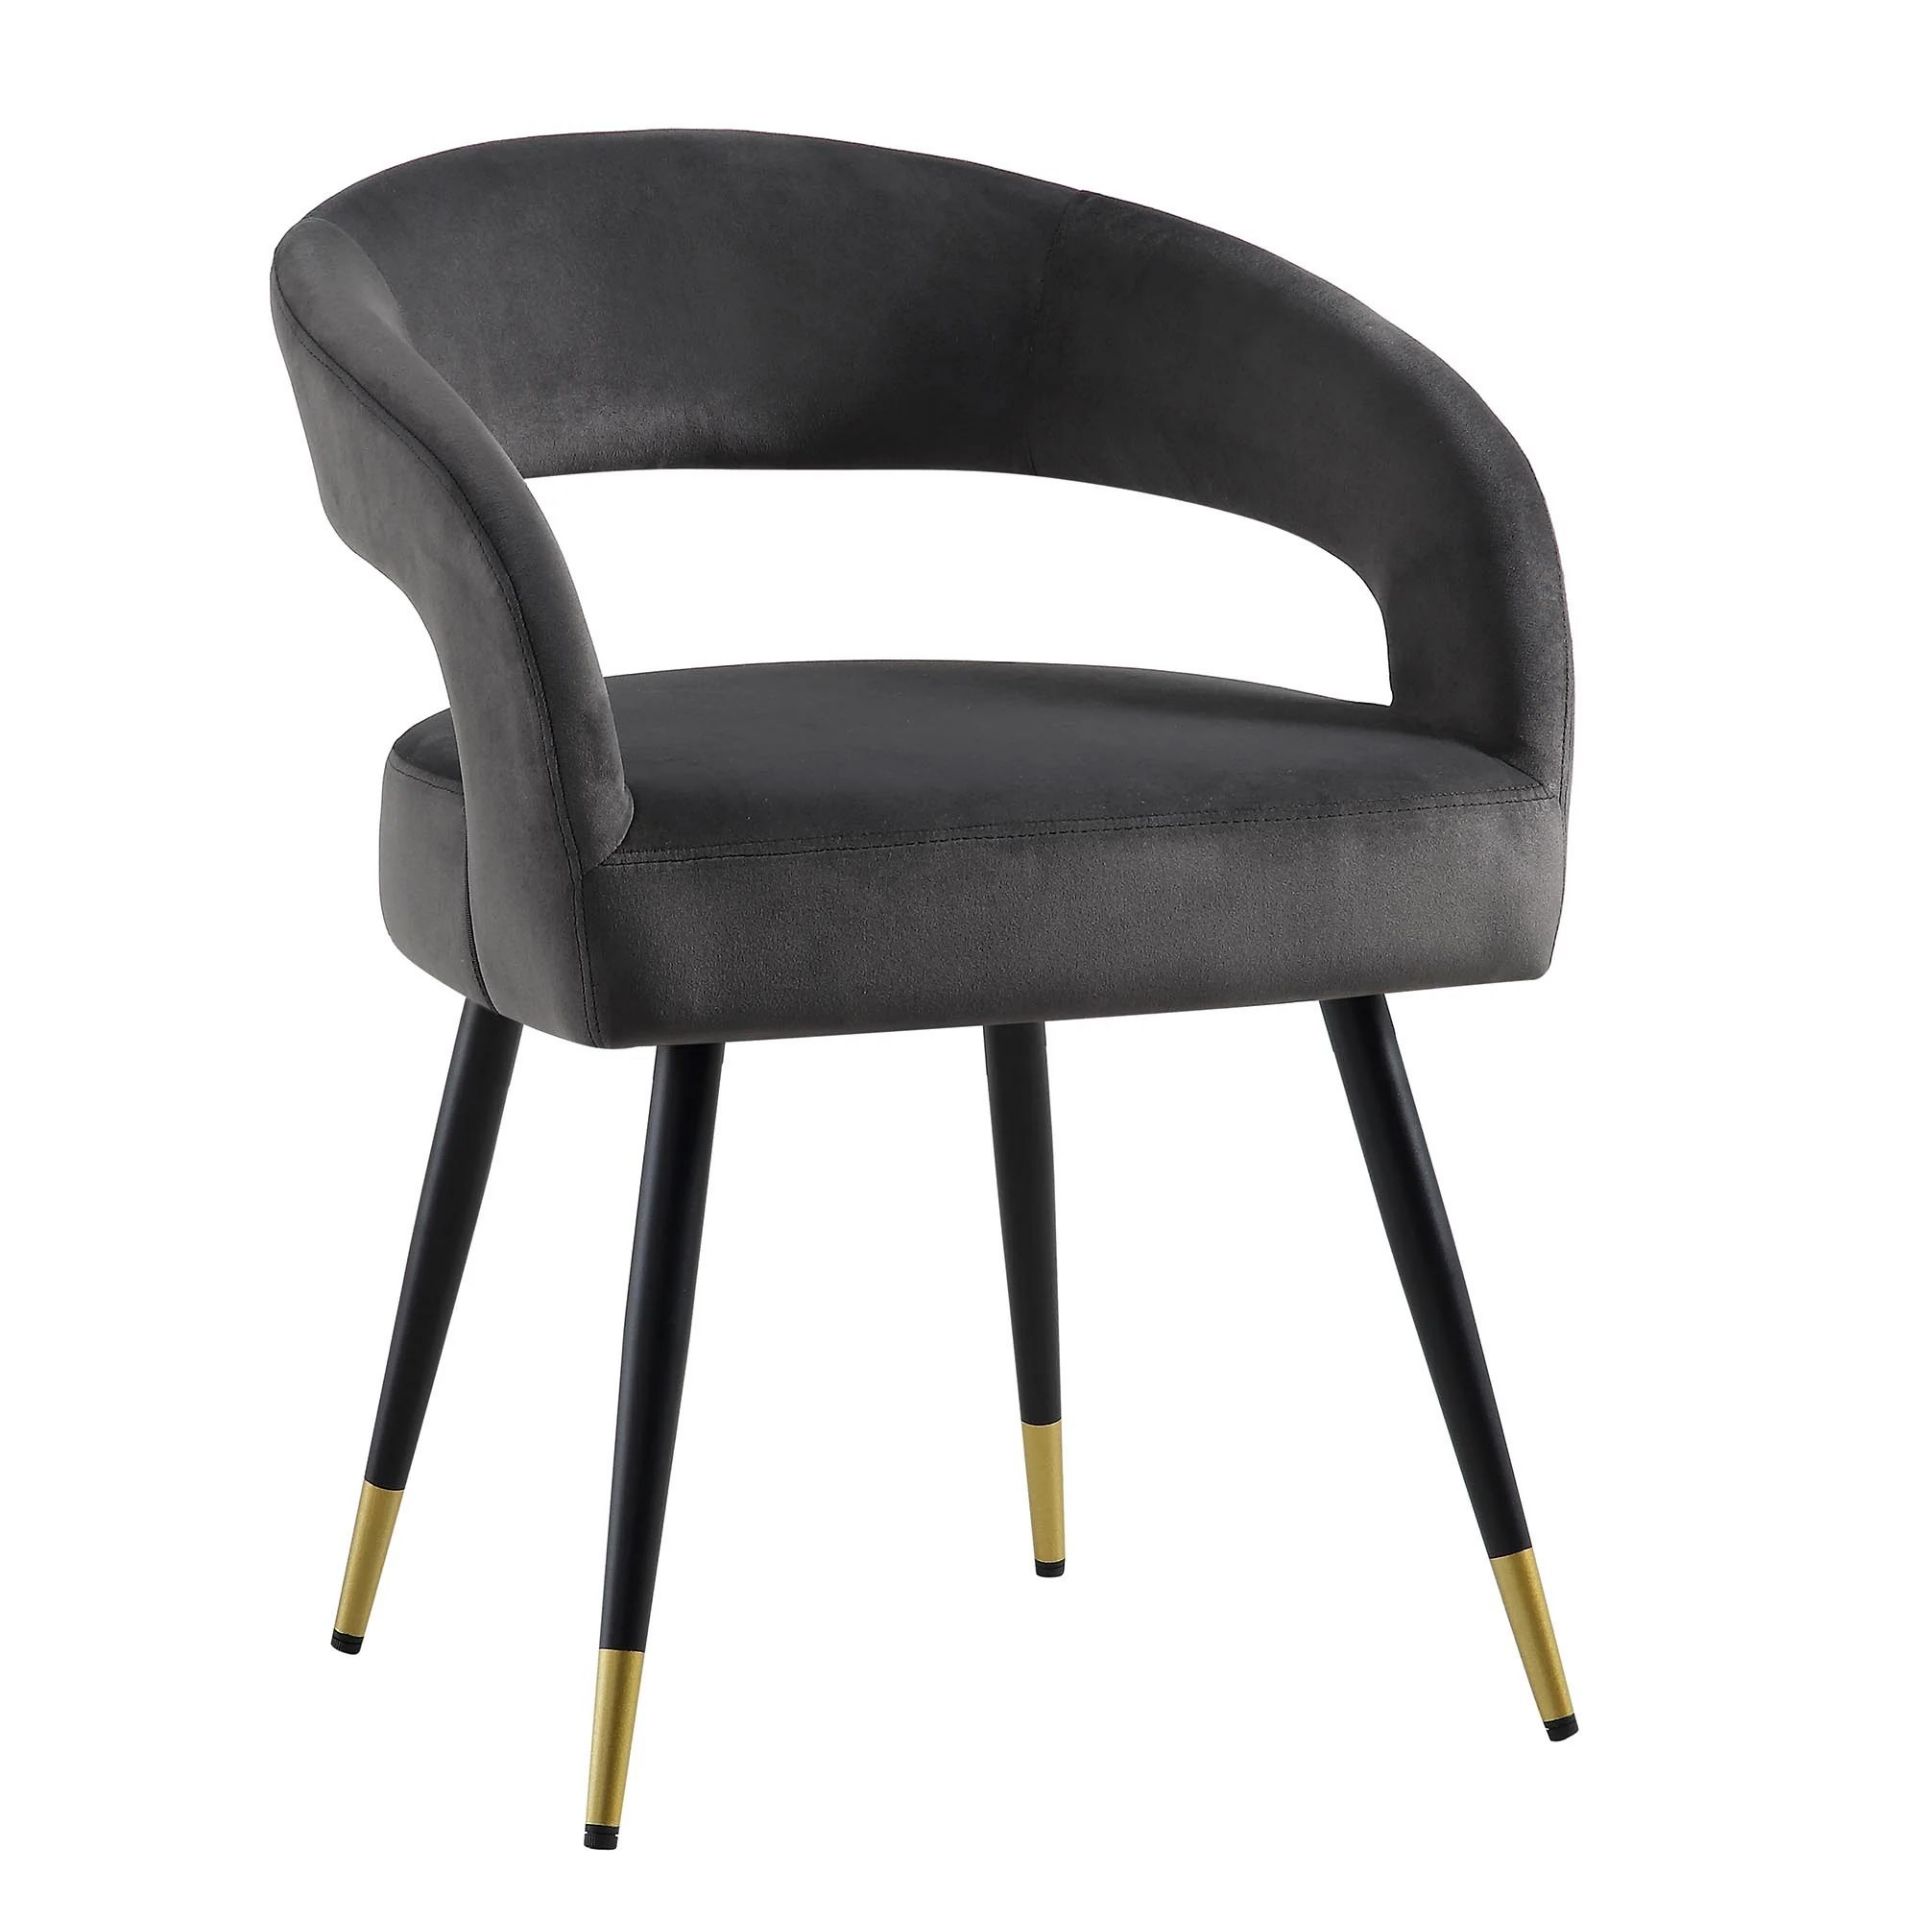 Laurel Wave Charcoal Velvet Set of 2 Dining Chairs. -R14. RRP £259.99. The curved cut out backrest - Image 2 of 2